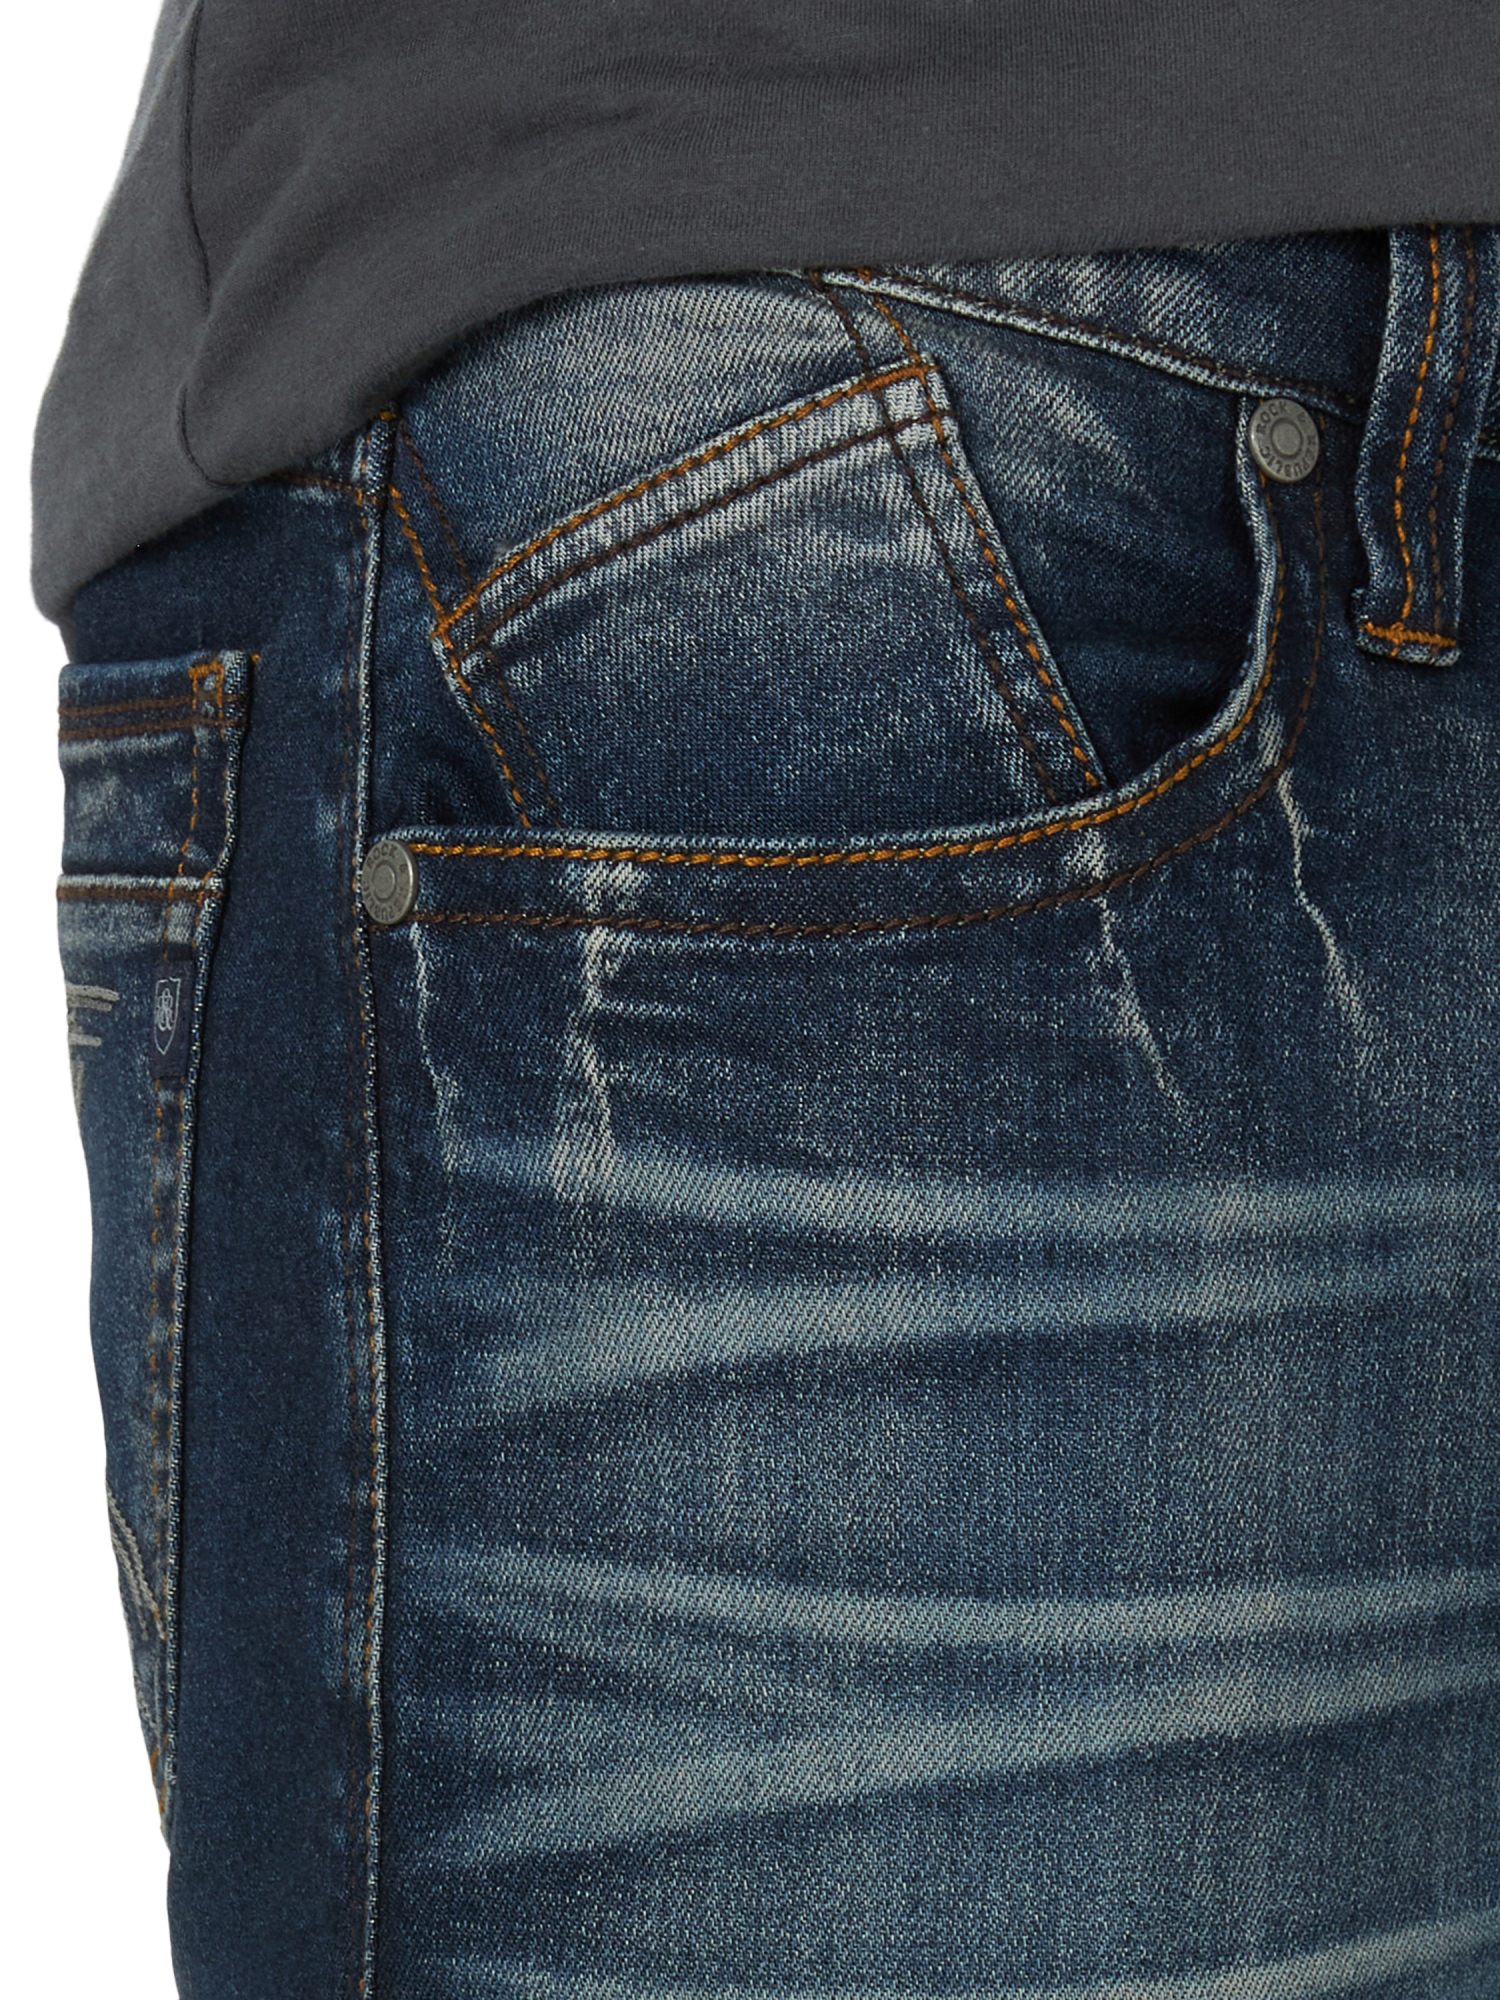 Rock & Republic Men's Relaxed Straight Leg Jean with Ultra Comfort Denim - image 5 of 6